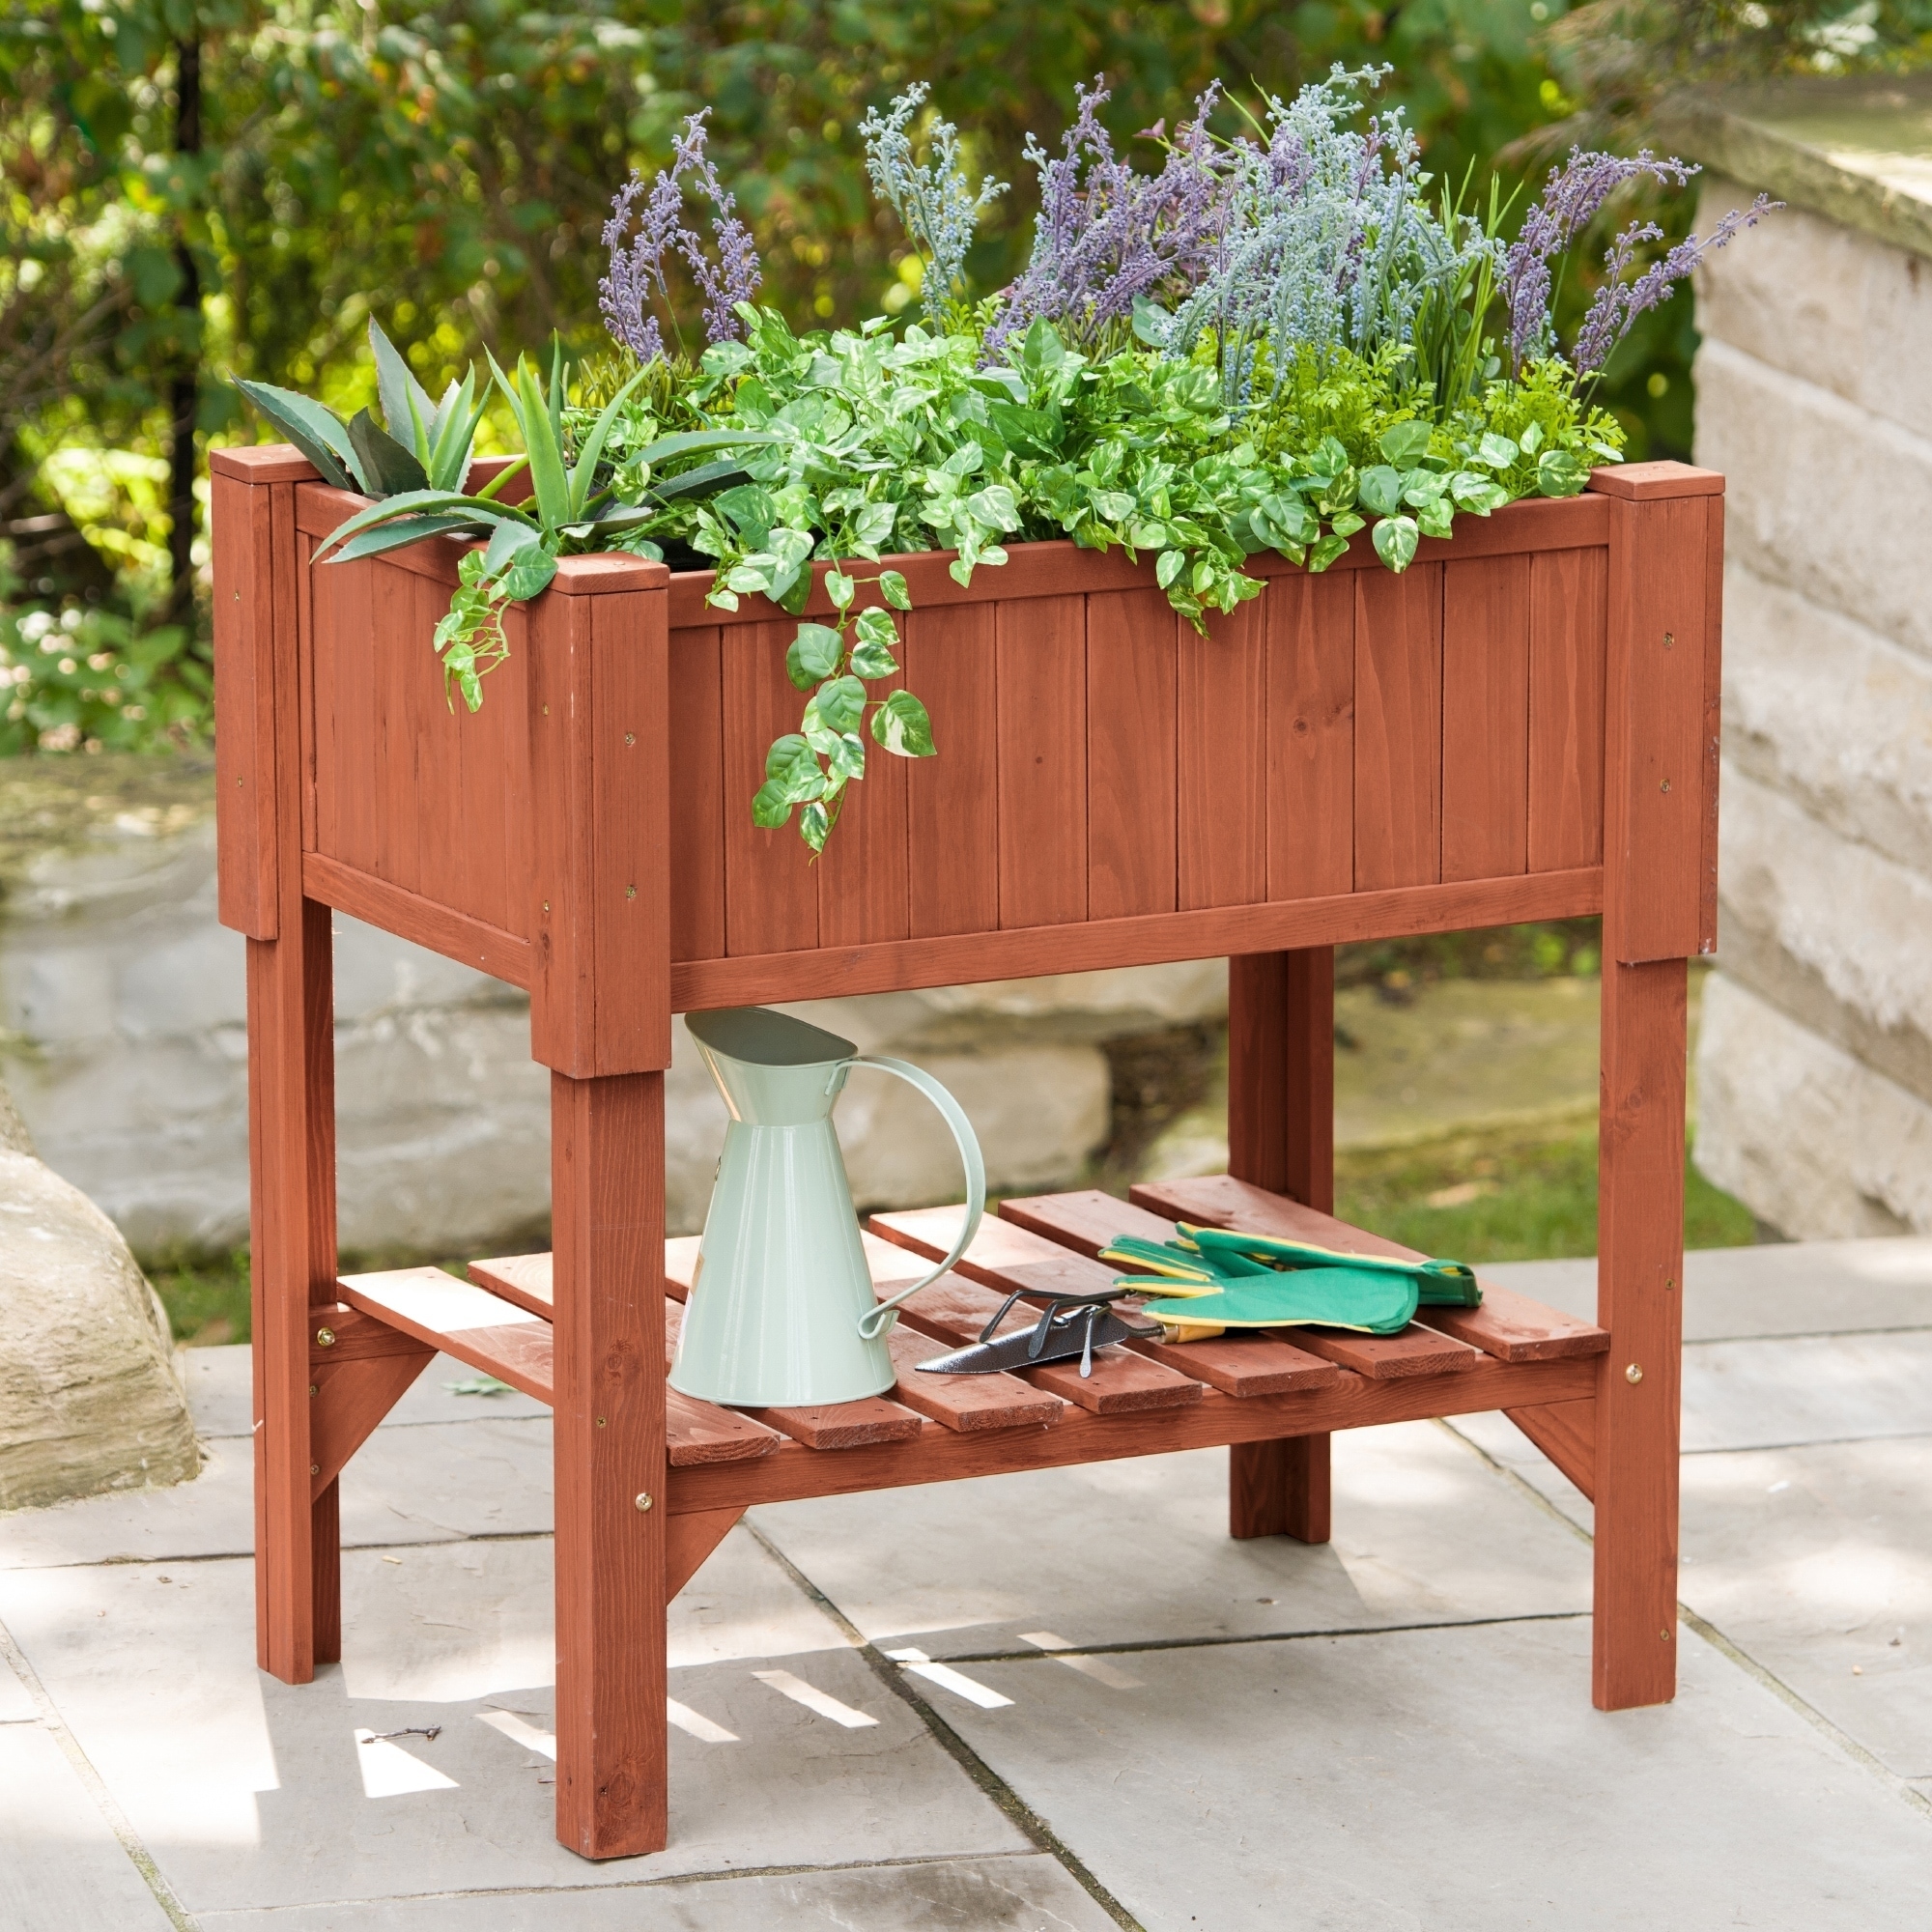 Shop Raised Planter Box - Free Shipping Today - Overstock - 8037729